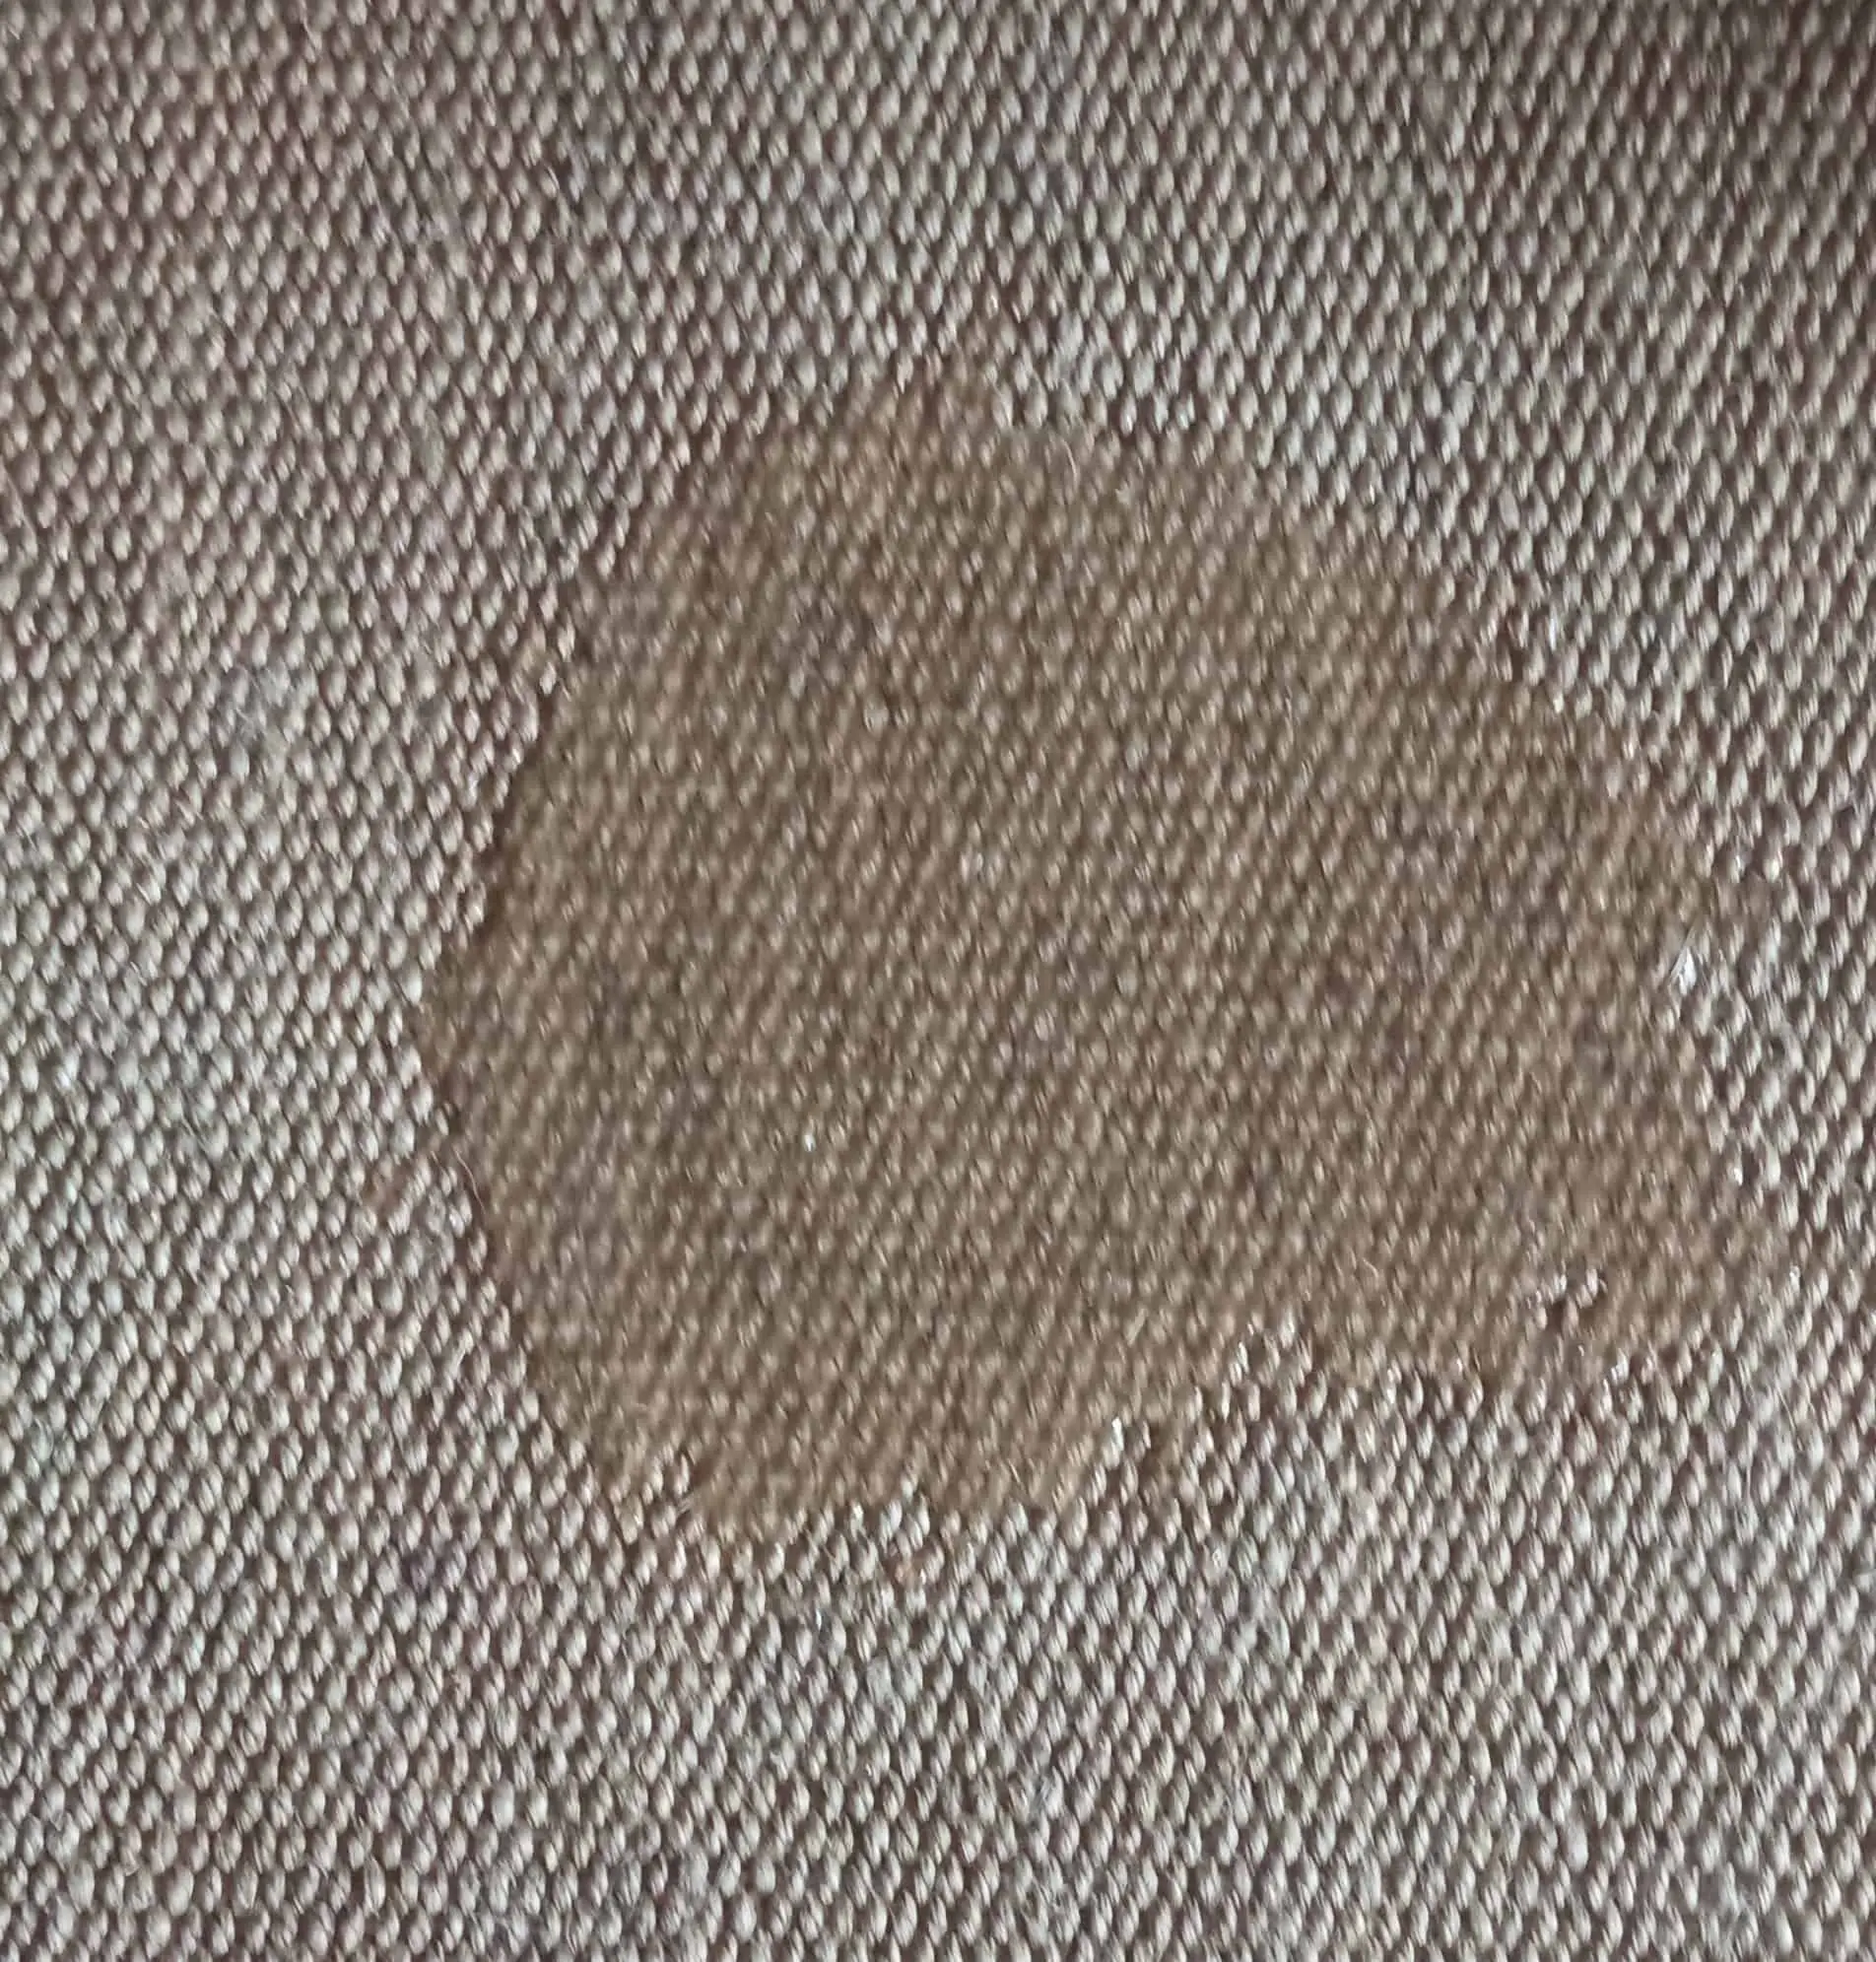 A wet patch on a rug